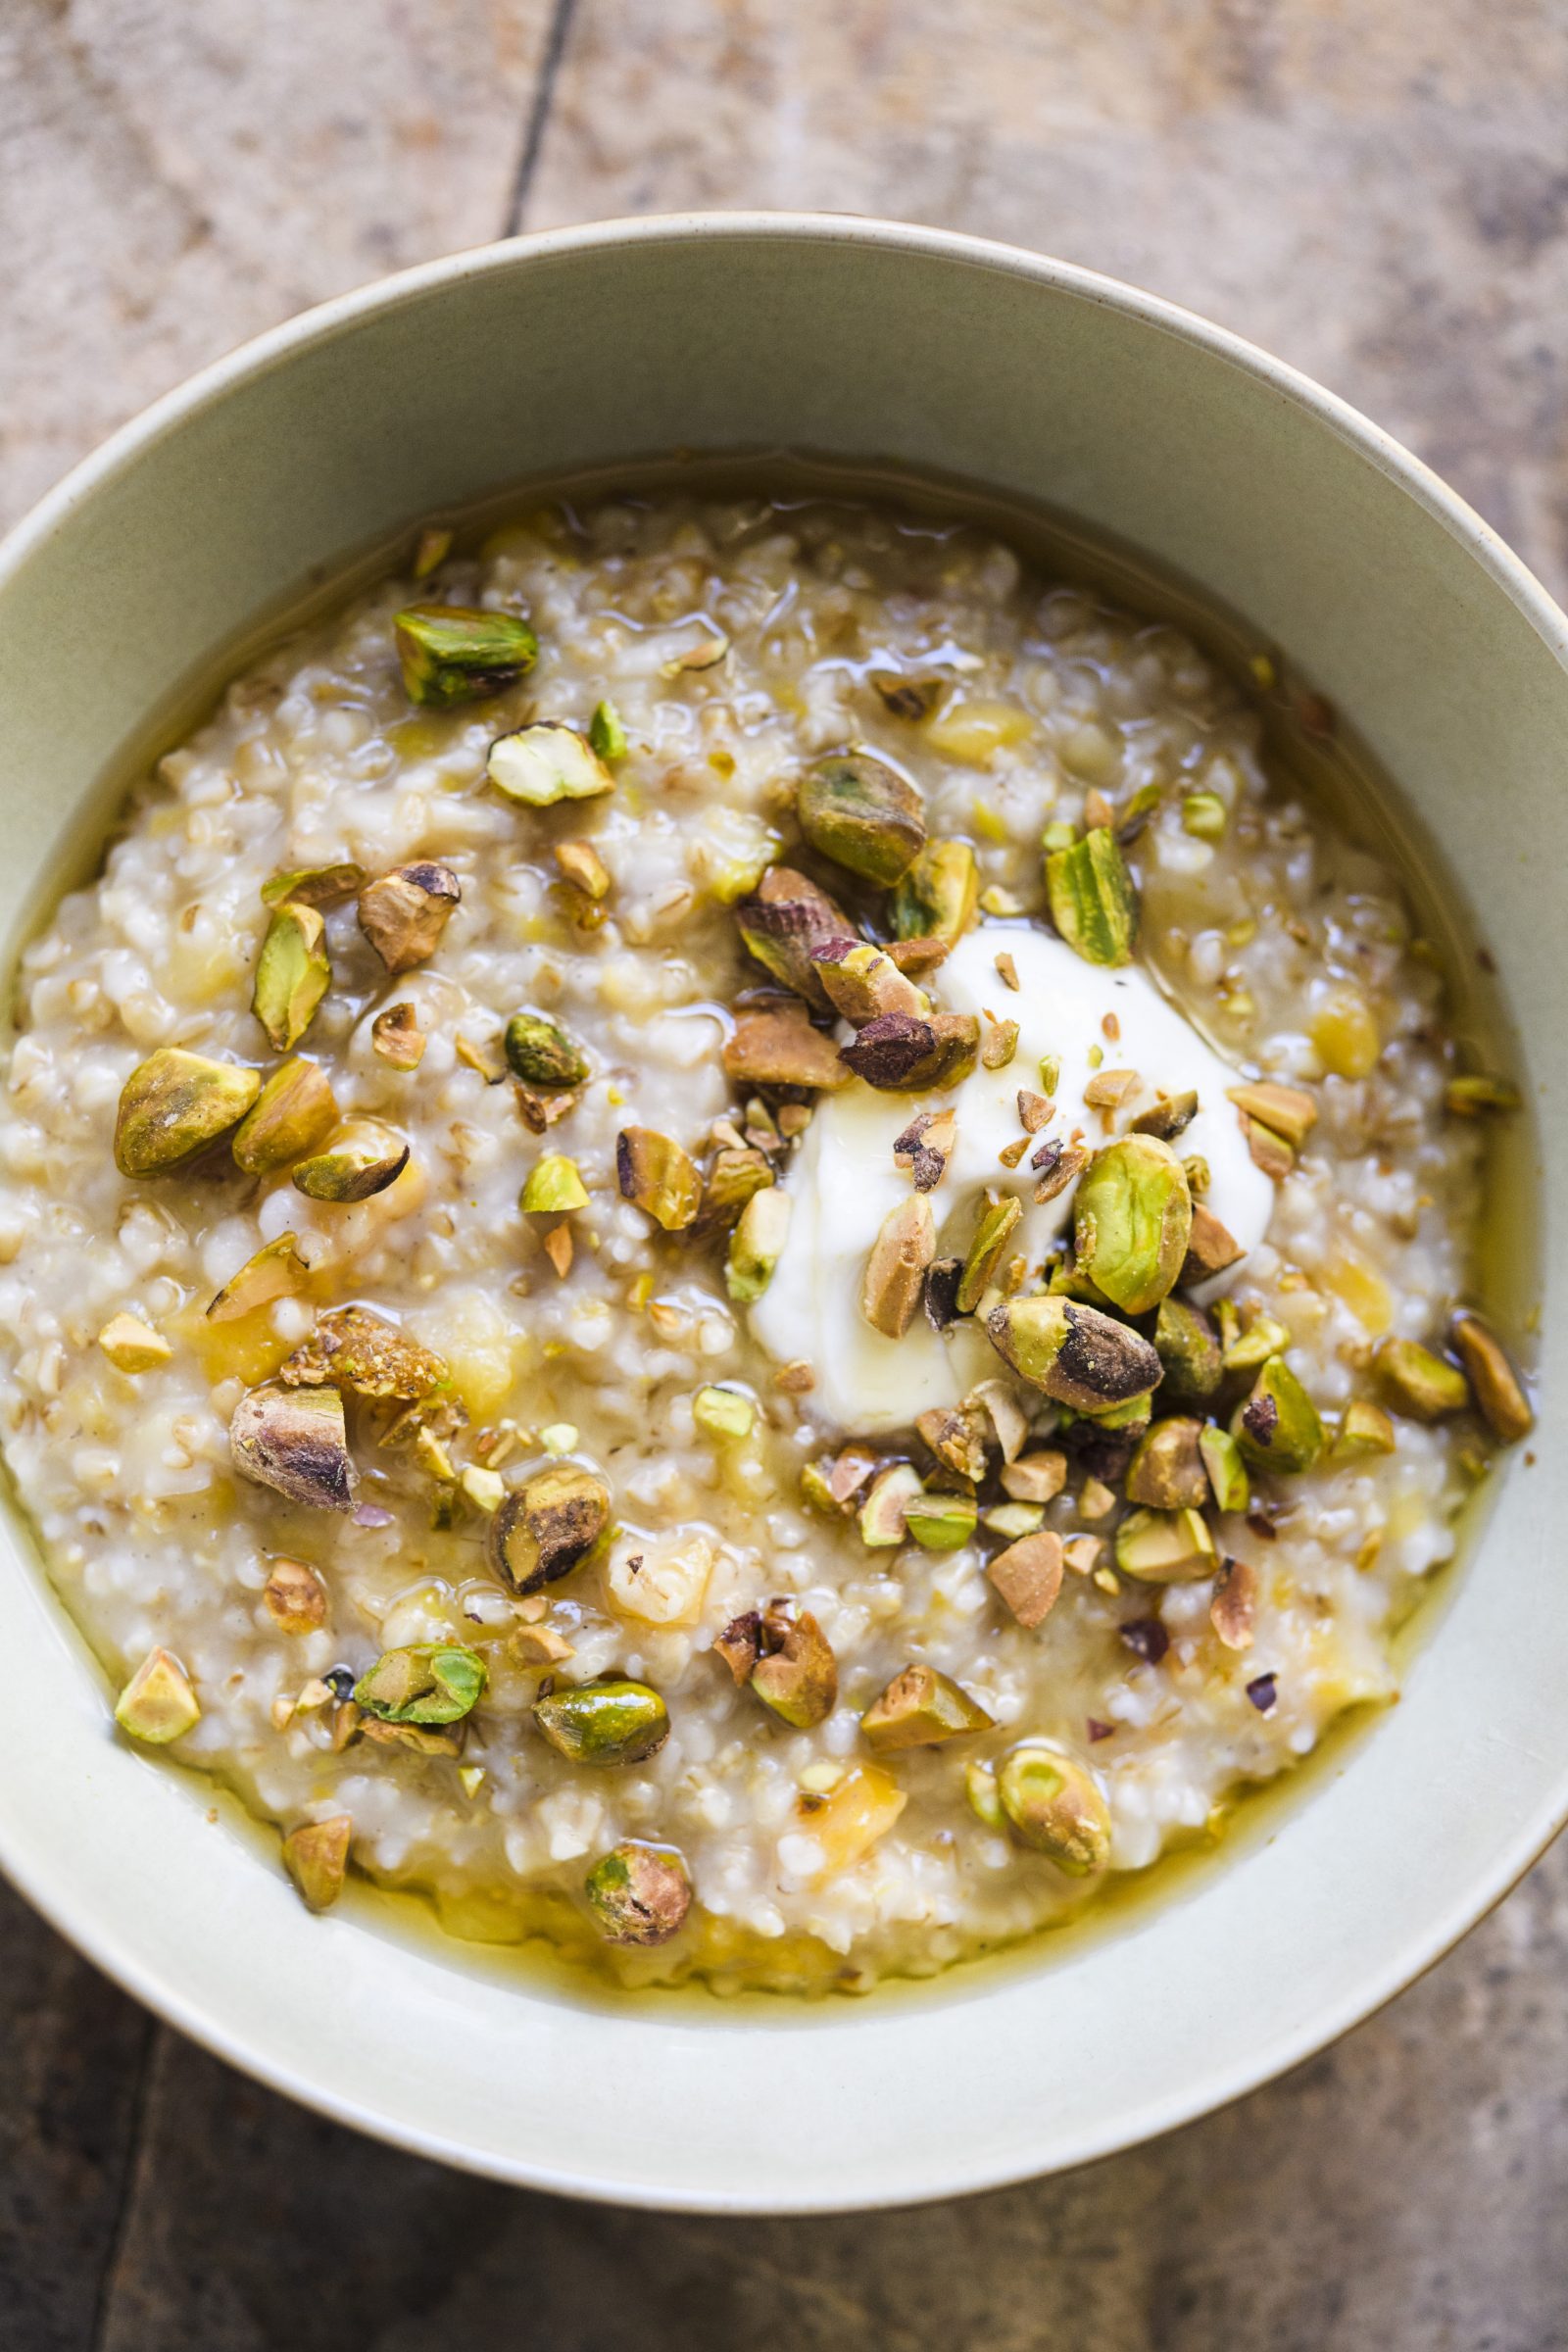 Steel-Cut Oats with Cardamom, Apricot and Pistachio (Durotherm)